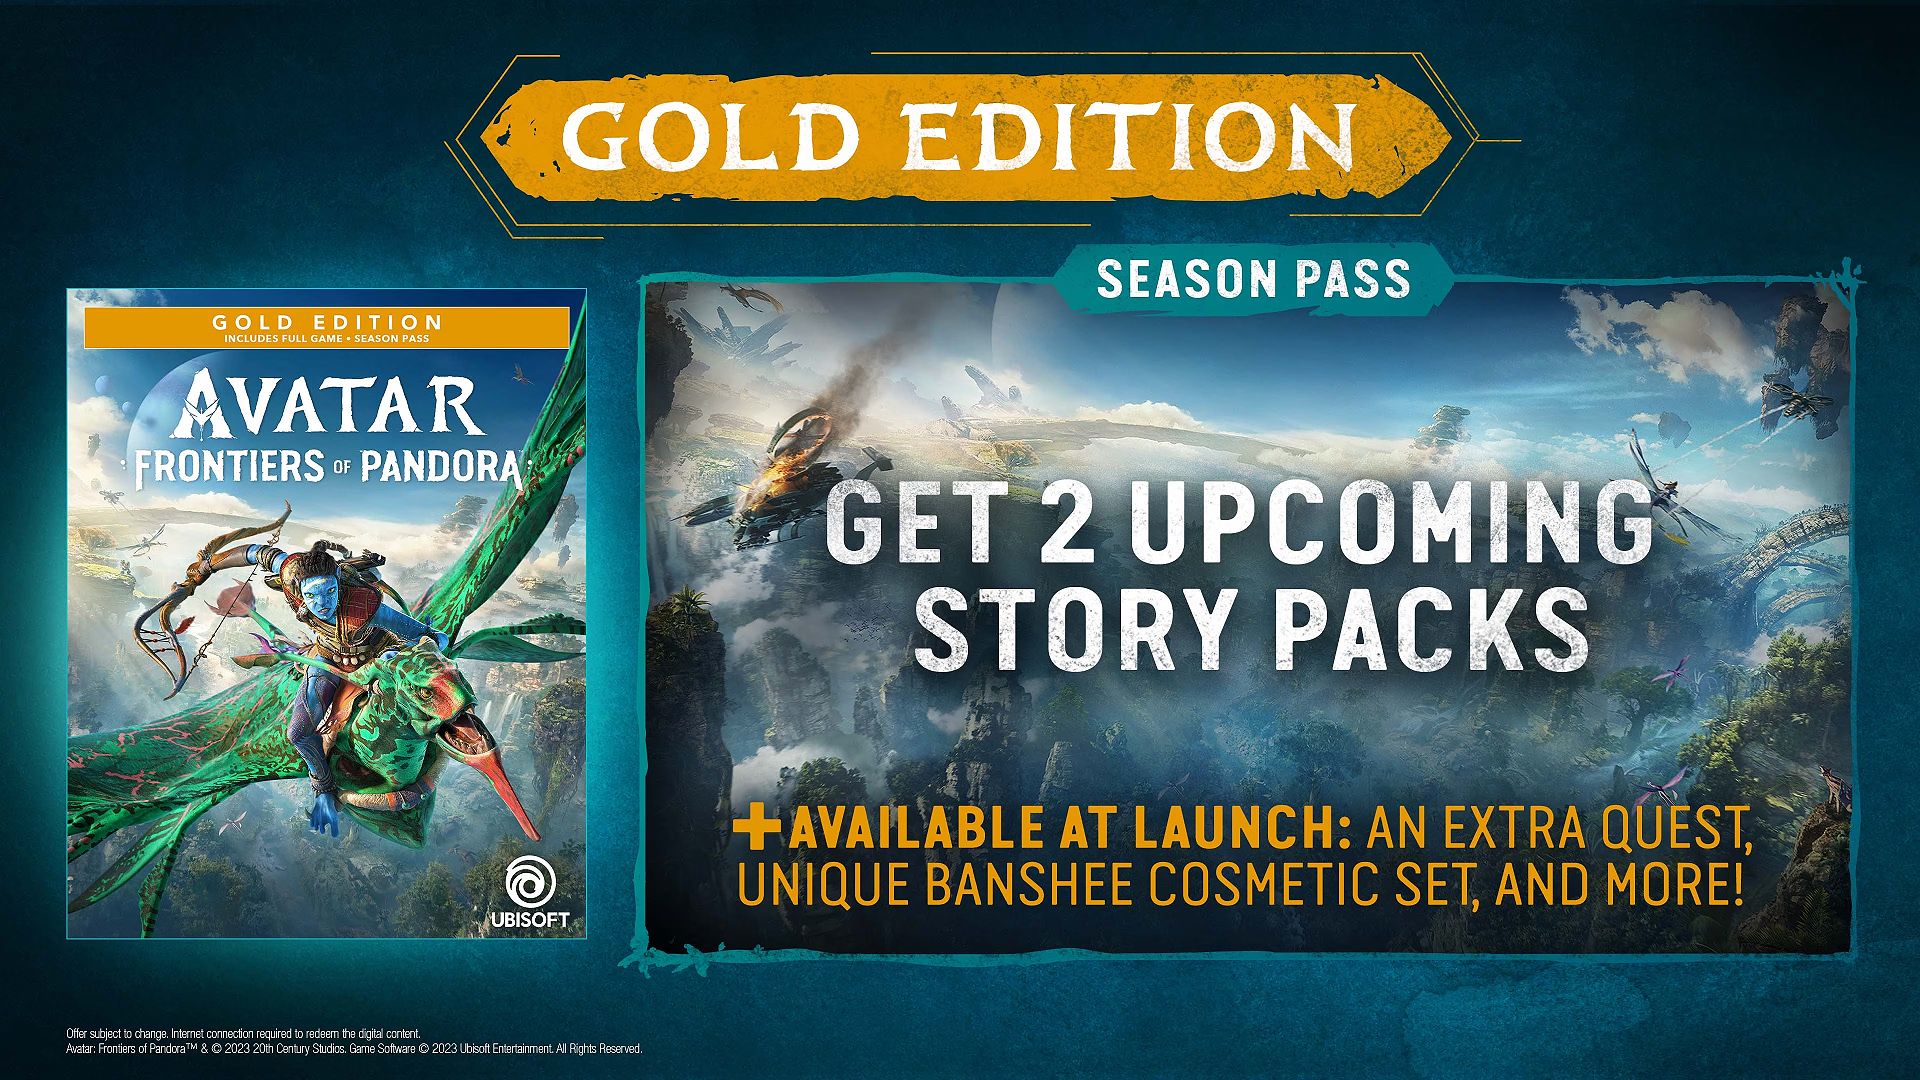 The Gold Edition of Avatar Frontiers of Pandora